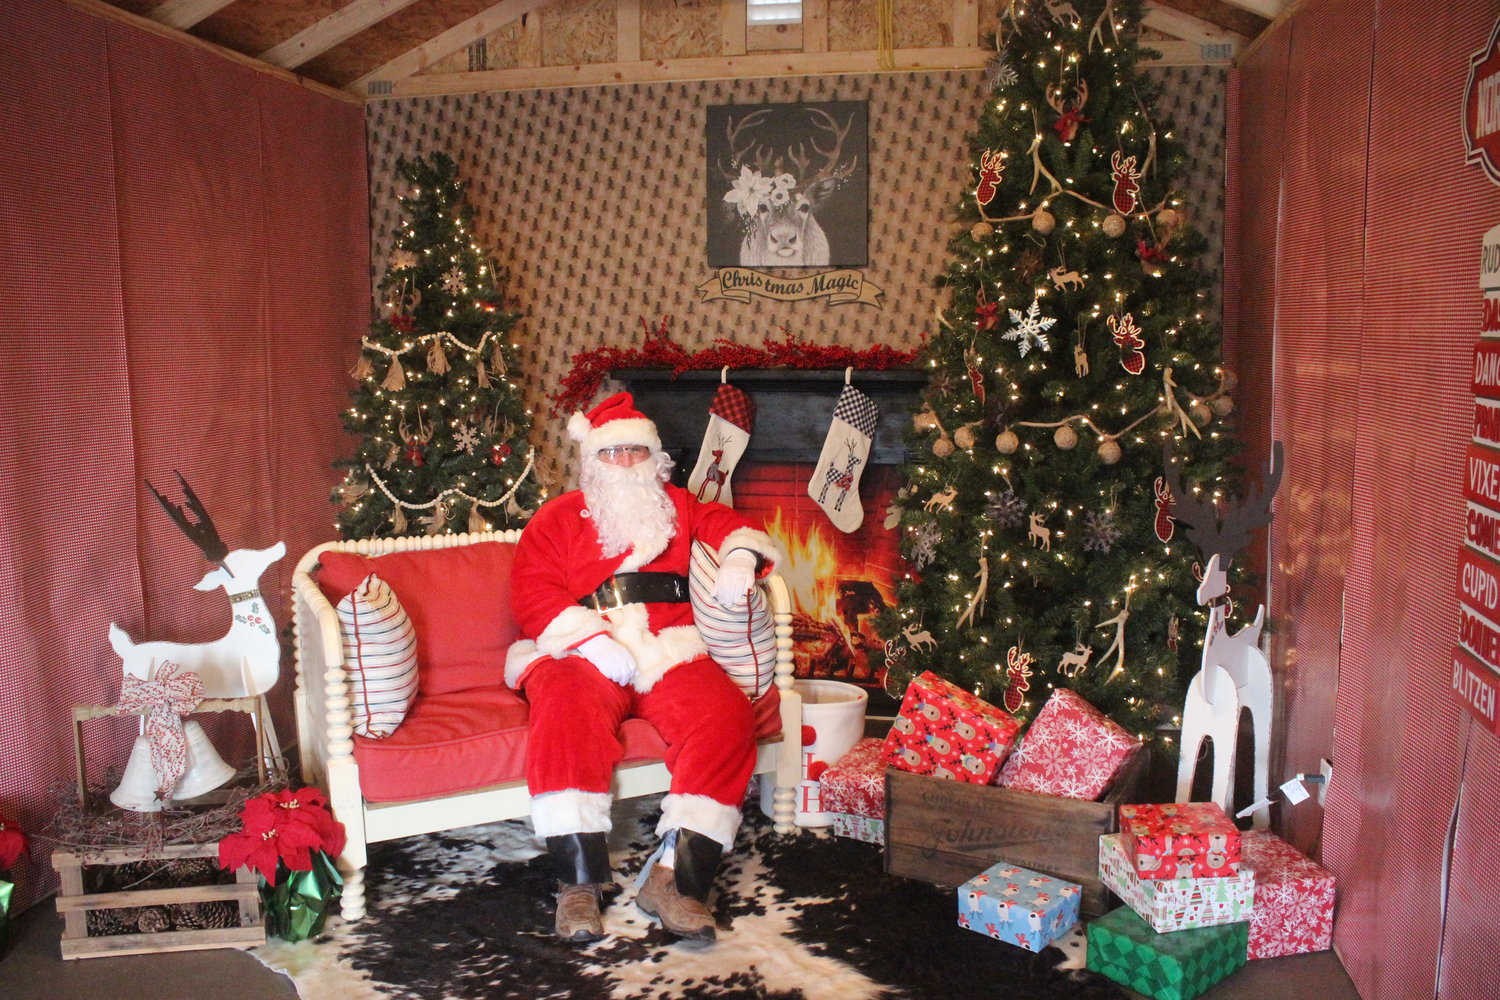 Santa Claus is ready for visitors at Holly Jolly Reindeer Ranch.